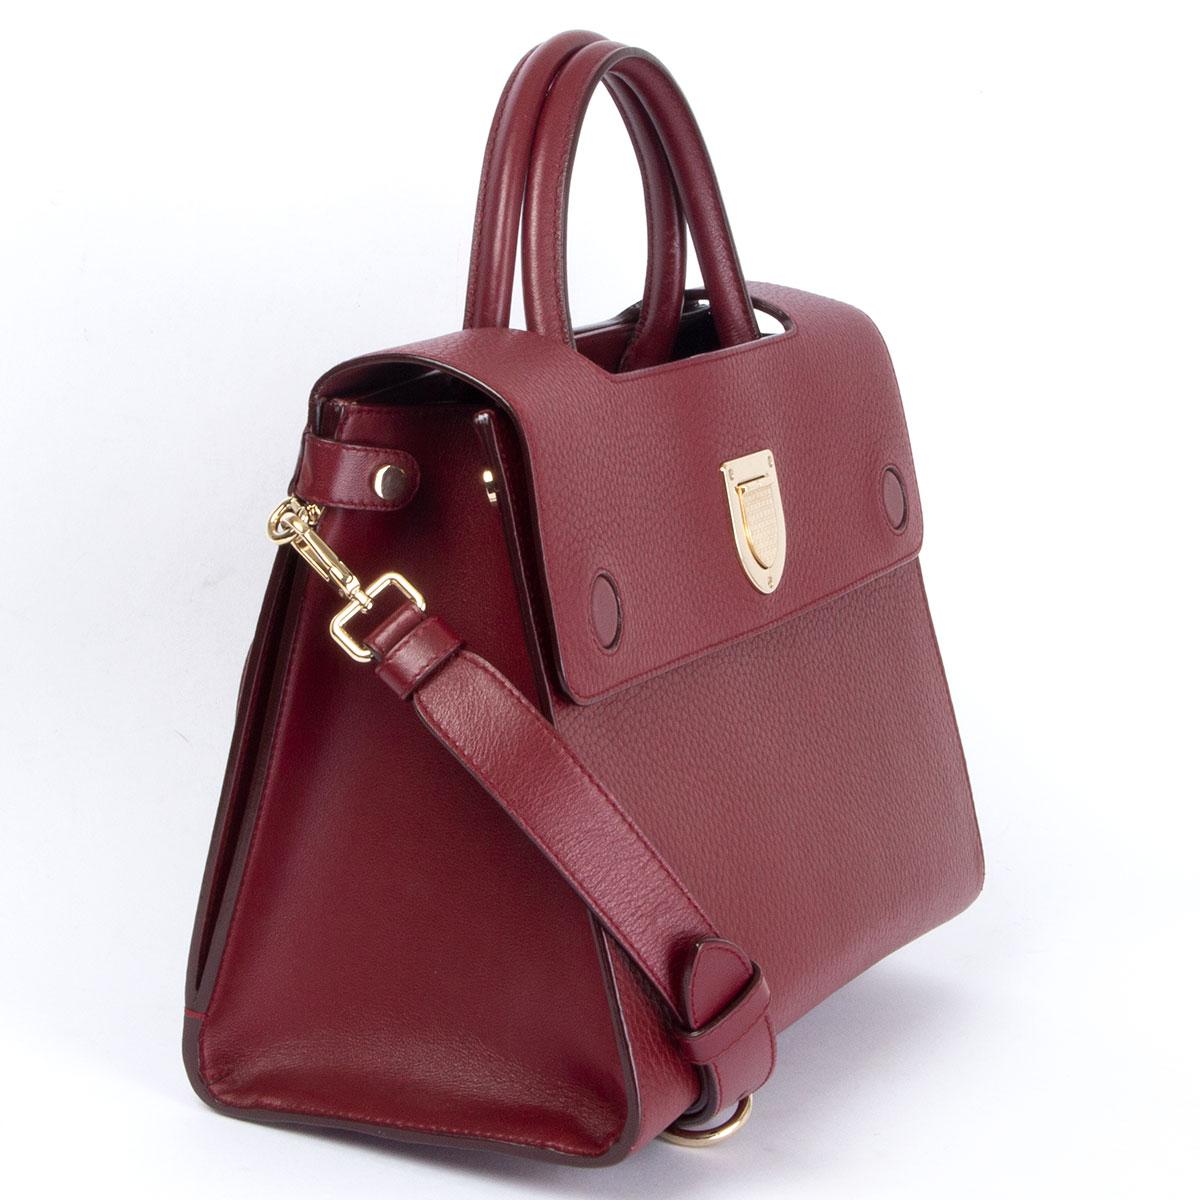 100% authentic Christian Dior Diorever Medium shoulder bag in burgundy grained leather. Opens with a magnetic flap closure and is lined in burgundy calfskin with three open pockets and one big open back pocket. Comes with a adjustable and detachable